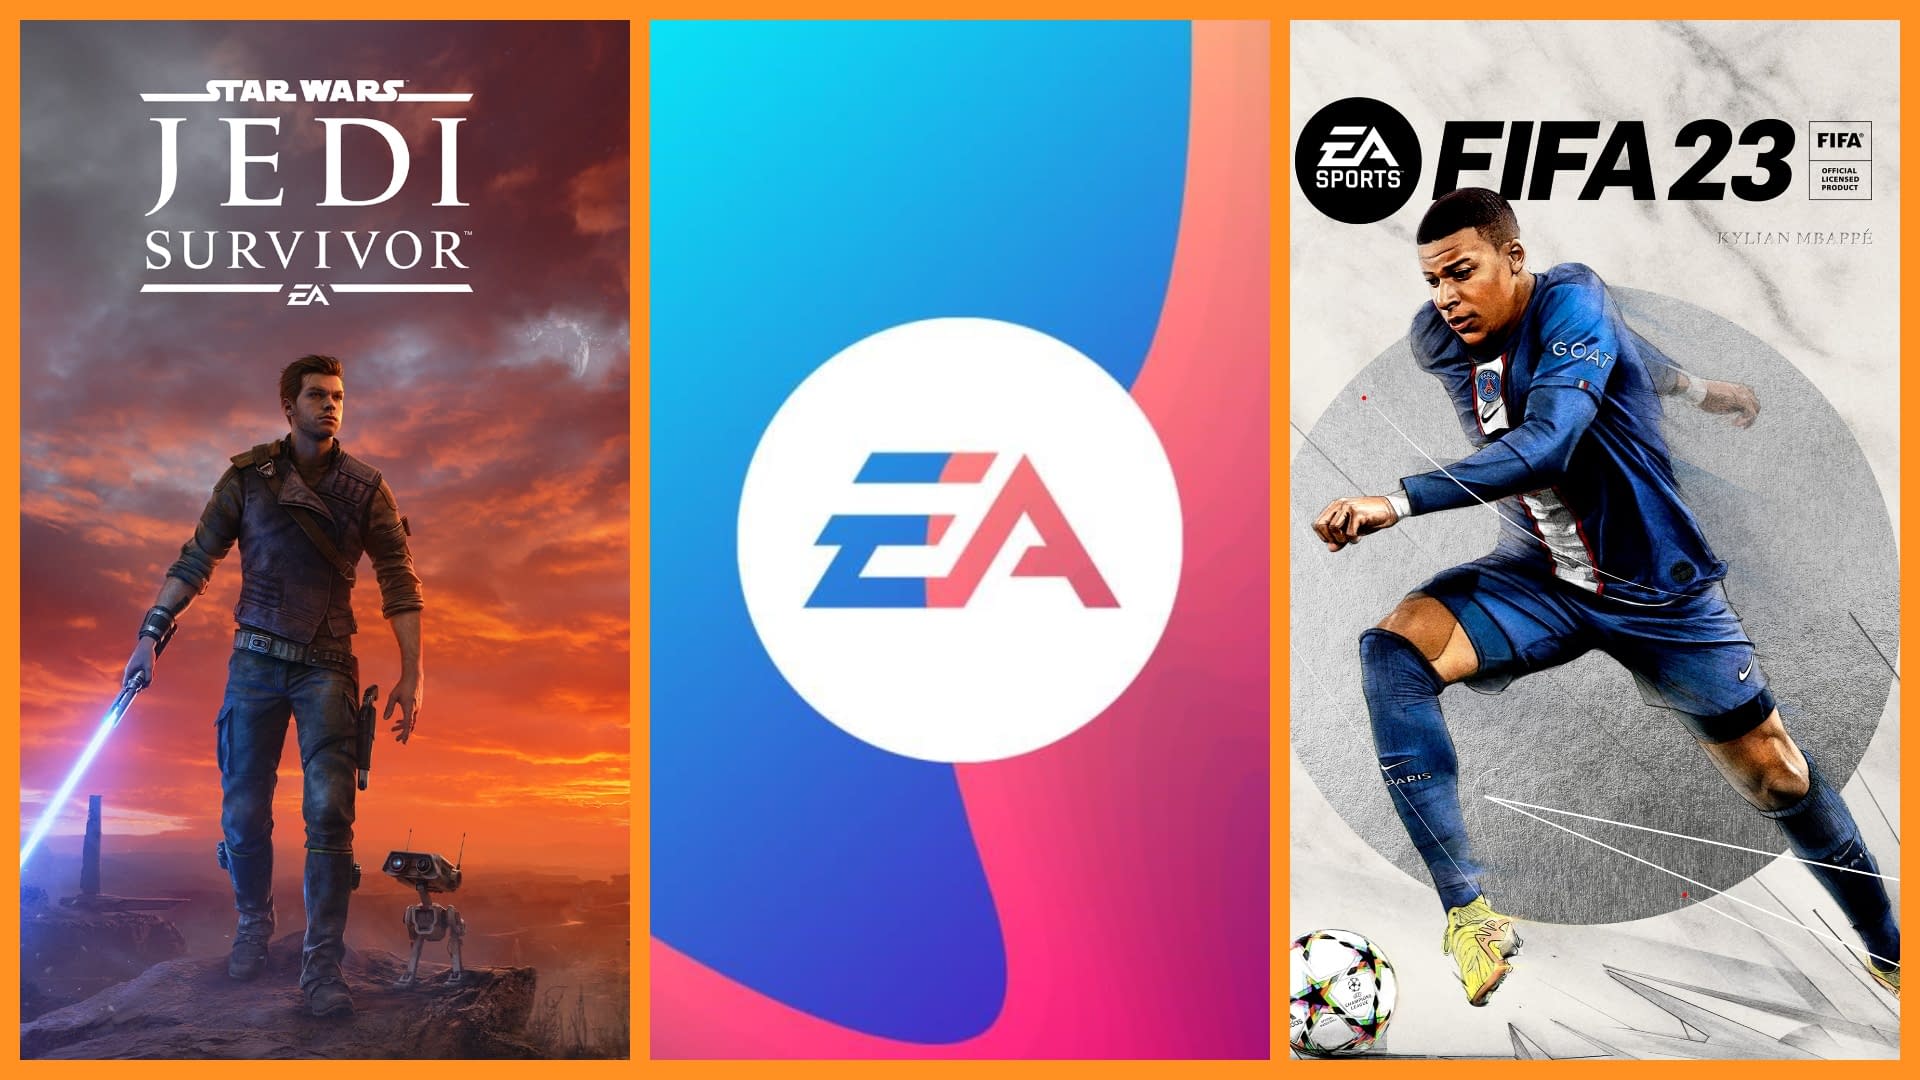 Electronic Arts, FIFA 23 and Earning Record with Star Wars Jedi Survivor